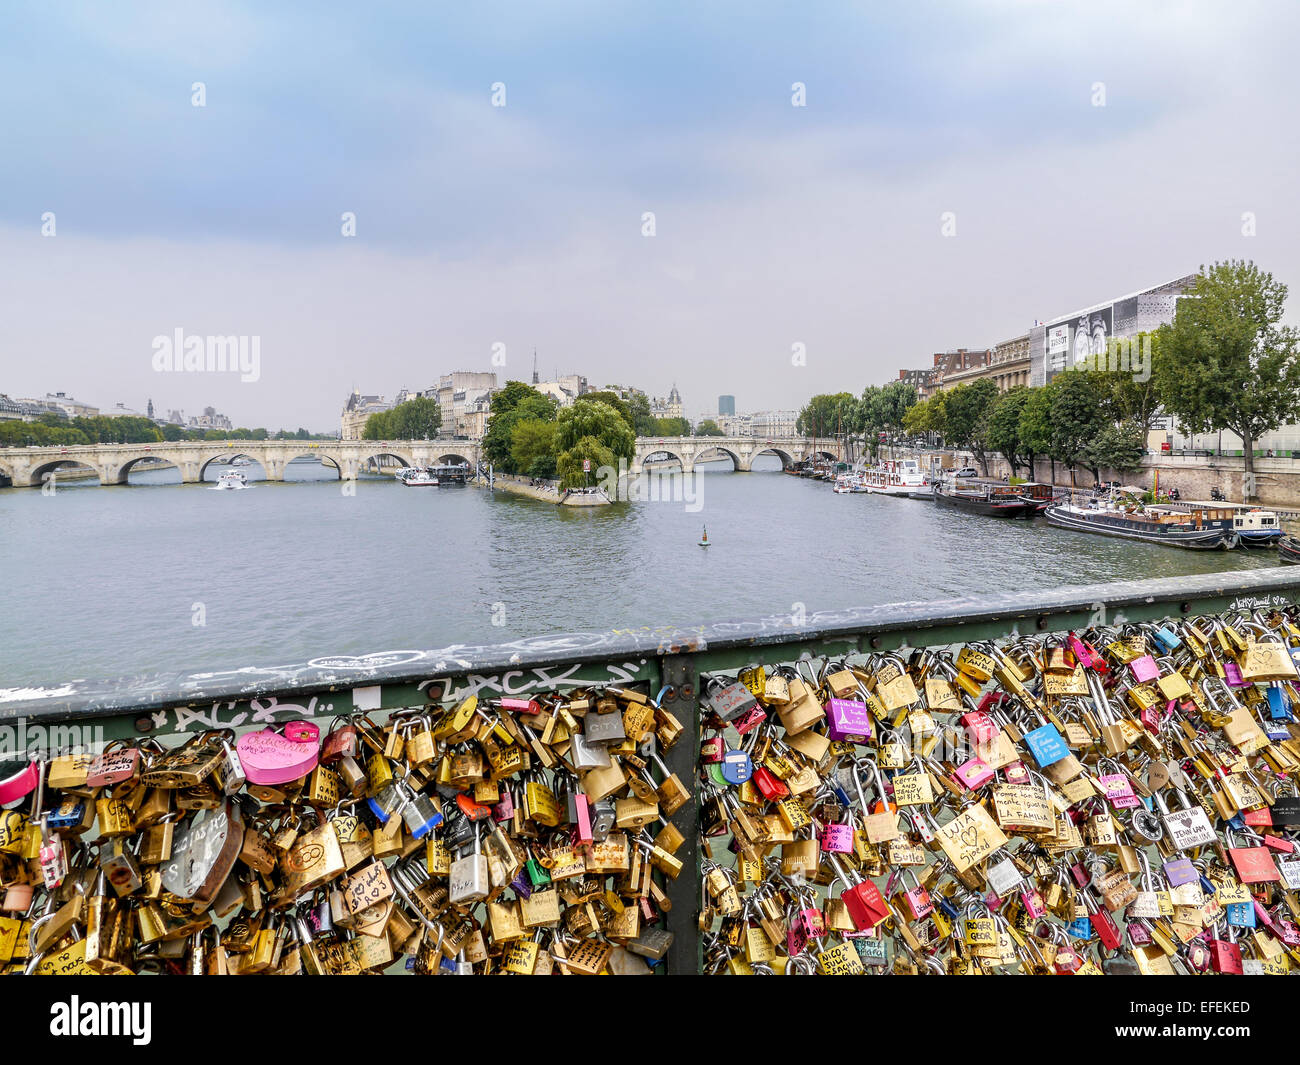 Pont des arts with many love padlocks attached to the bridge fence, Paris, France Stock Photo